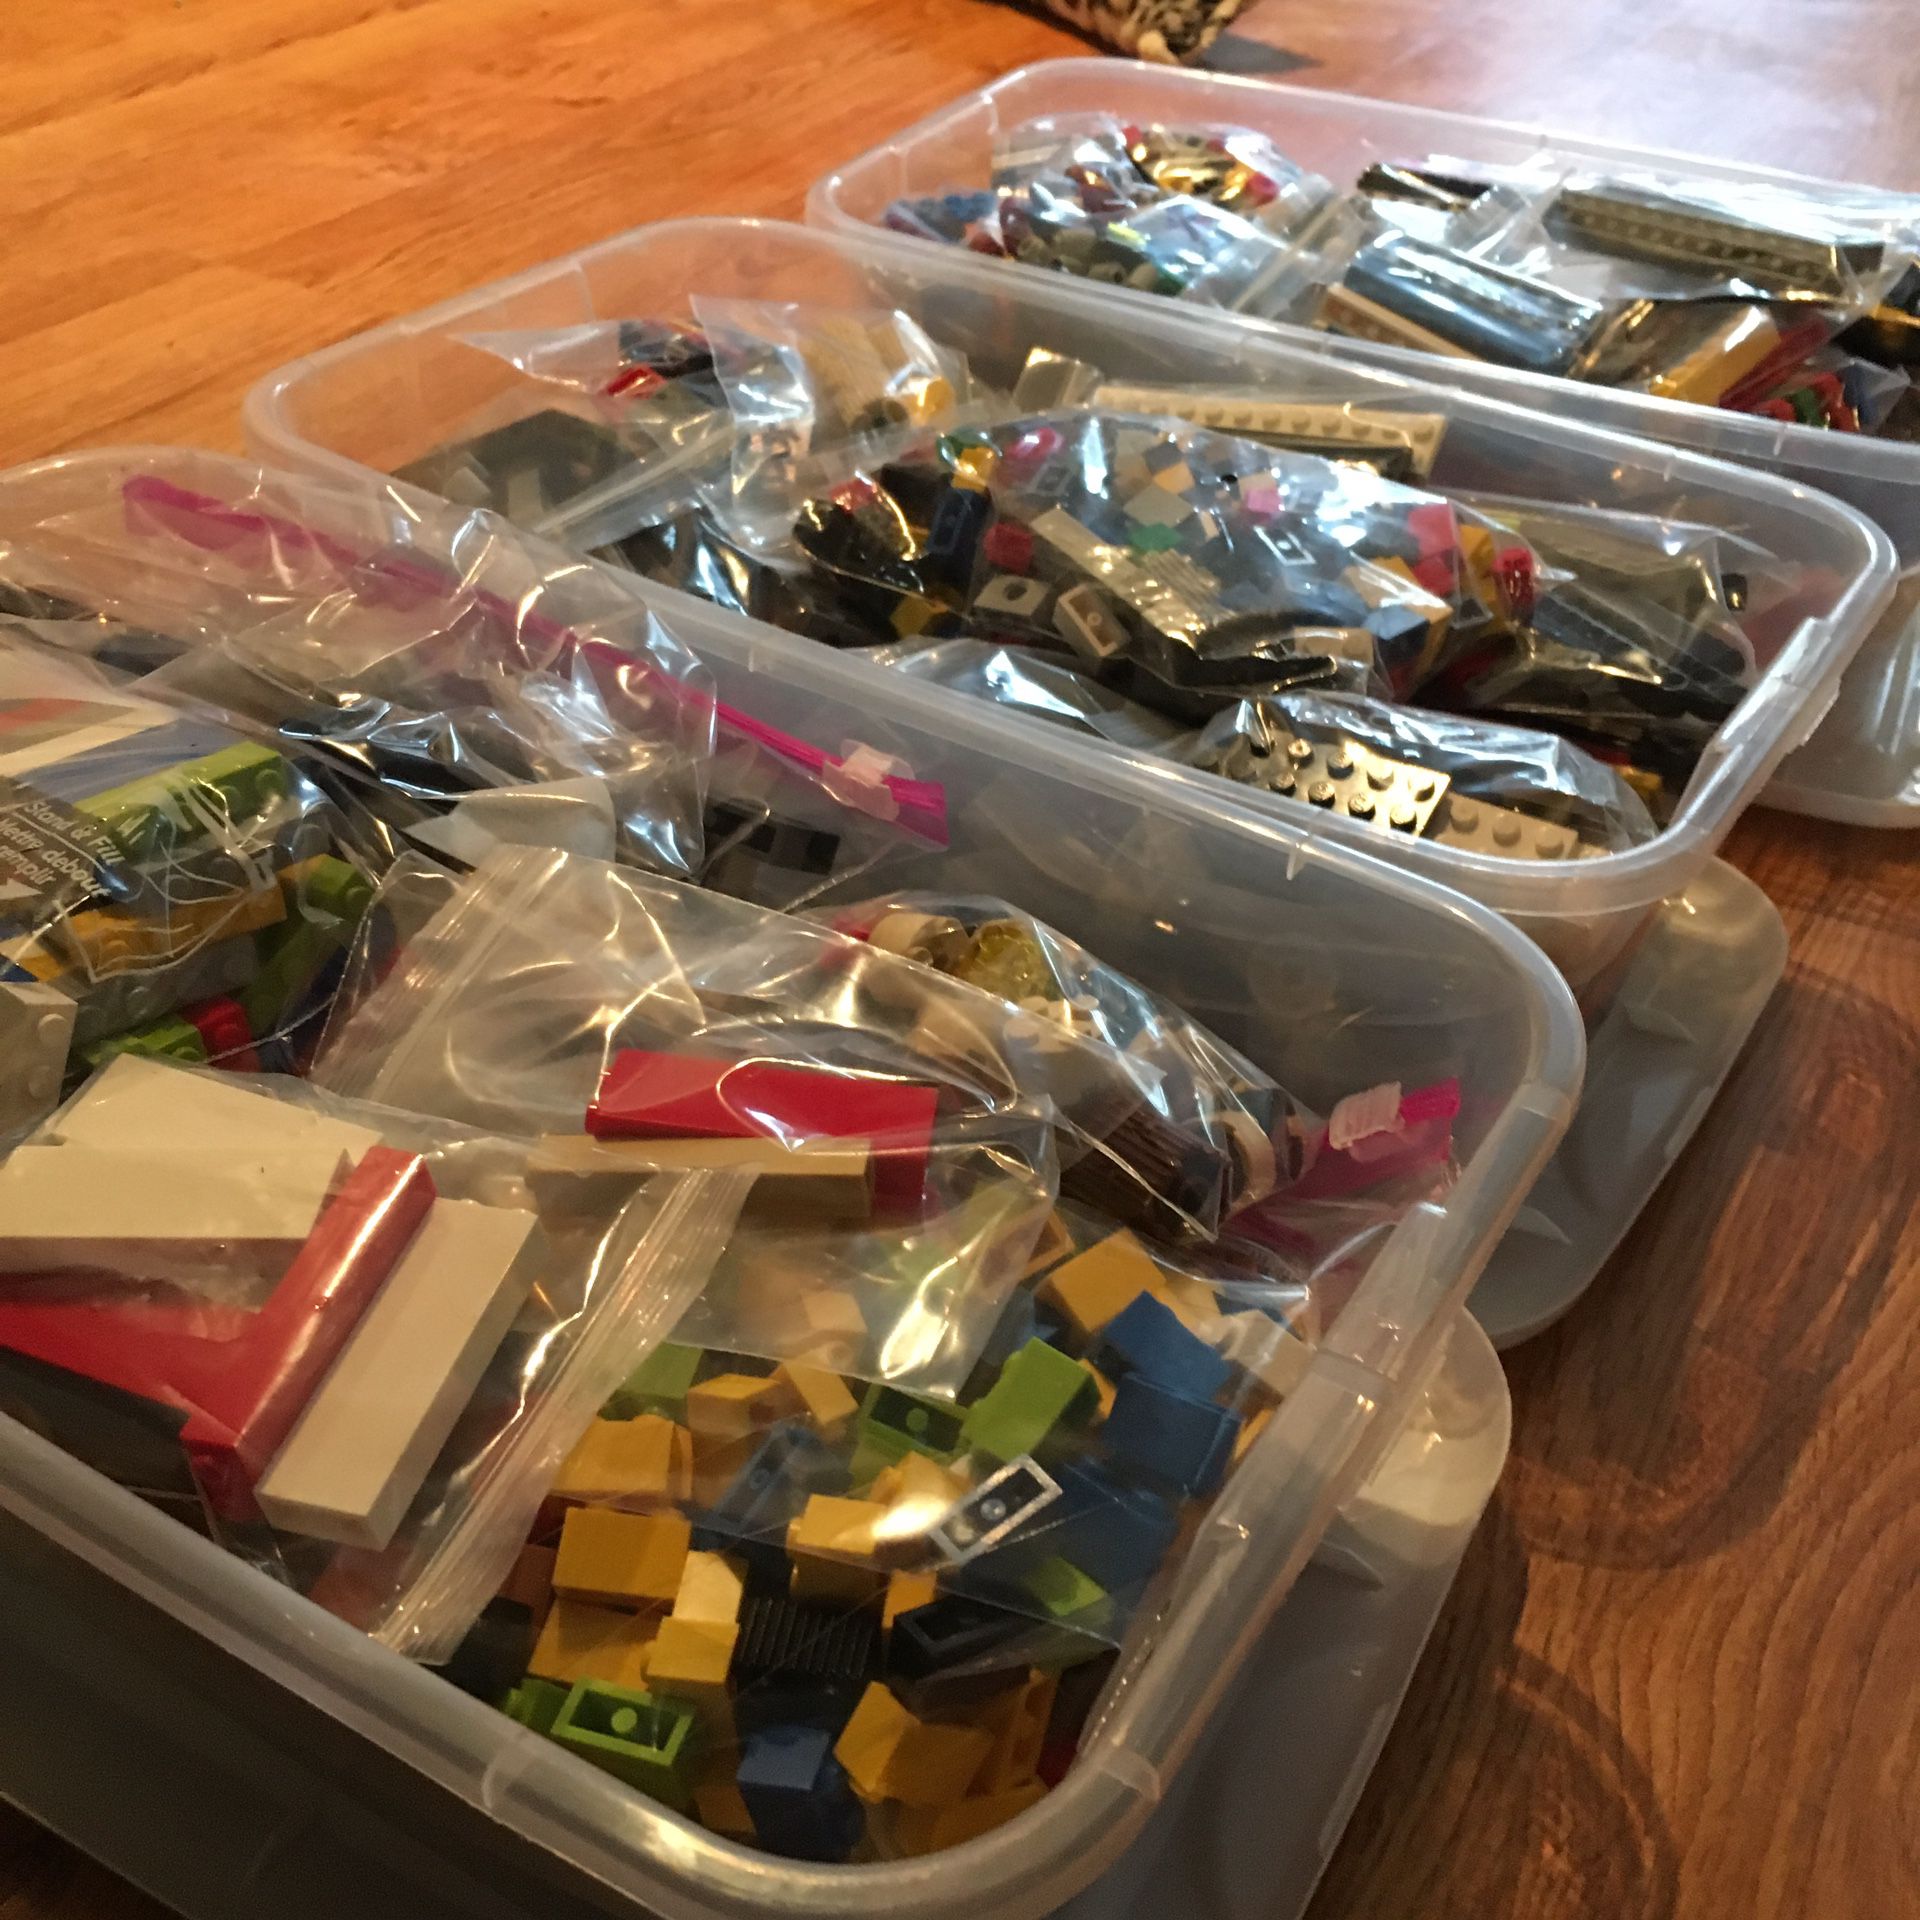 Lot of sorted lego plus containers pictured